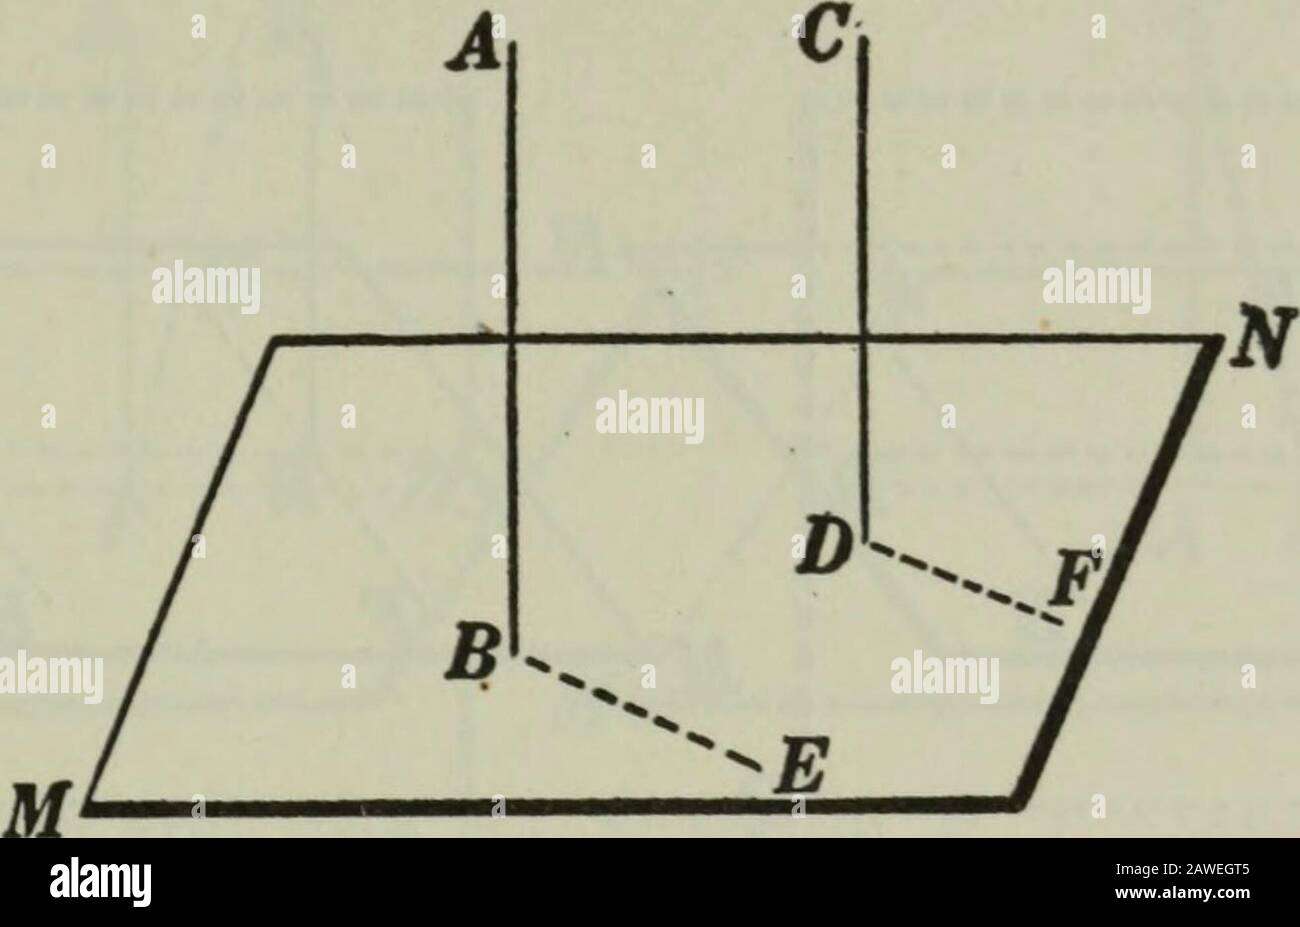 Plane and solid geometry . Given Z ABC in plane MN and Z DEF in plane RS with BAand BC II respectively to ED and EF, and lying on the same sideof line BE. To prove Z. ABC=Z. DEF. Argument 1. Measure off BA = ED and BC = EF 2. Draw AD, CF, AC, and DF, 3. BA 11 ED and BC II EF. 4. Then ADEB and CFEB are Z17. 5. .. ^i) = ^^ and Ci^= jBJ^. 6. .-. AD= CF, 7. Also AD 11 5^ and Ci^ li BE 8. .*. ^2) II CF. 9. .*. vlCi^D is a O. 10. .-.^(7=2)^. 11. But BA = ED and BC== EF. 12. .-. A ABC = A DEF. 13. .-. Z ABC= Z D^i^. Q.E.D. 1 2 3 4 5 6 7 8 9 10 11 12 13 Reasons§ 122.§ 54, 15.By hyp.§240.§ 232.§ 54, 1. Stock Photo